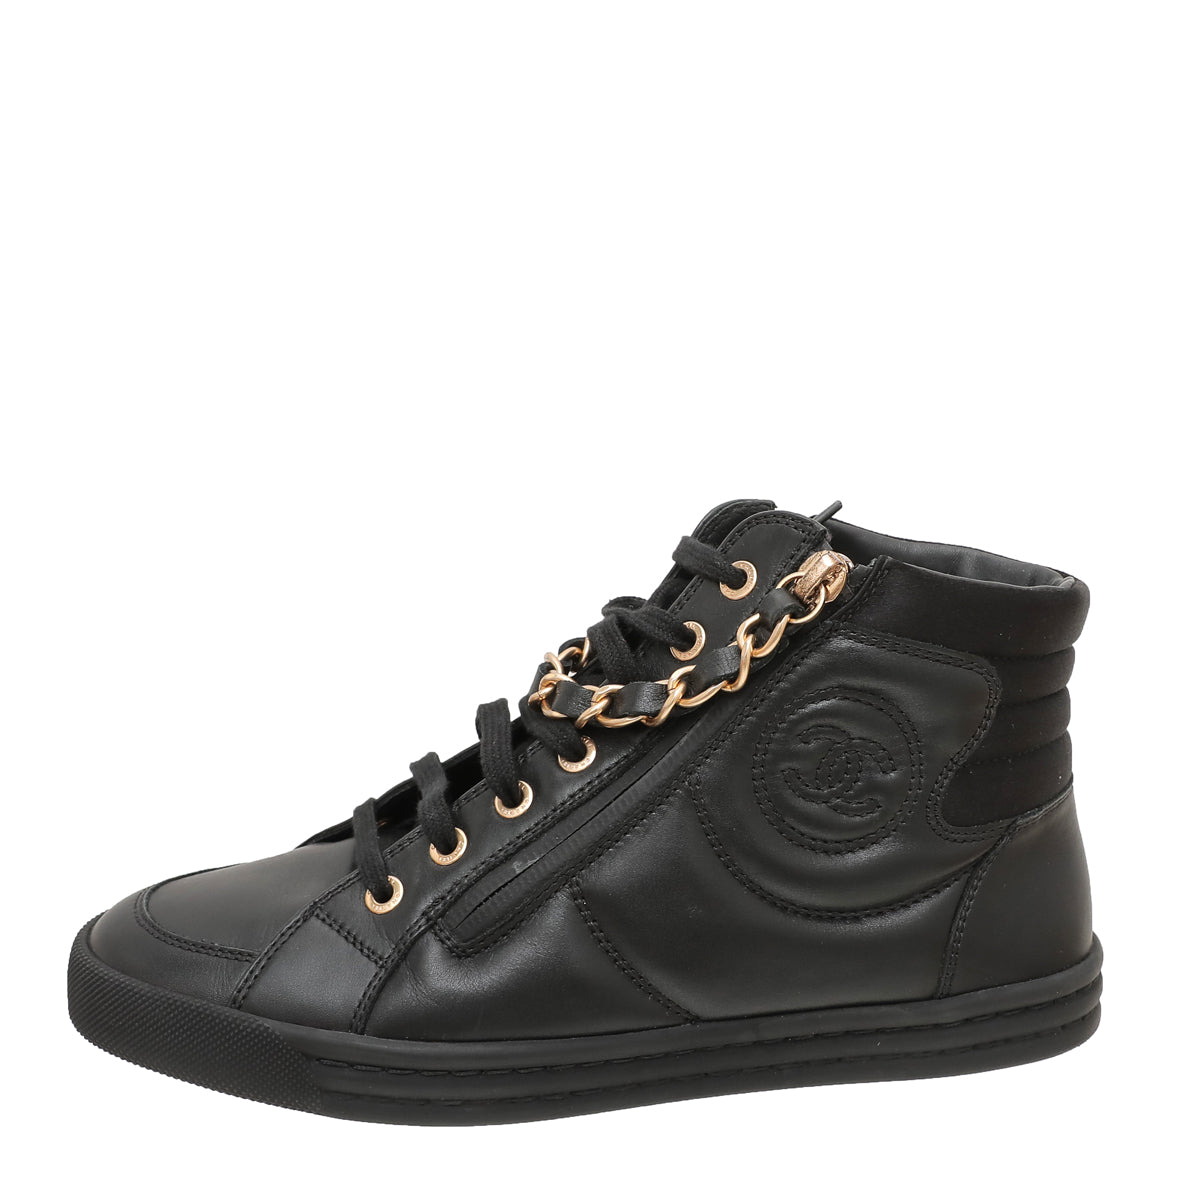 Chanel CHANEL Coco Mark High Cut 38 Sneakers Velor Black P11777